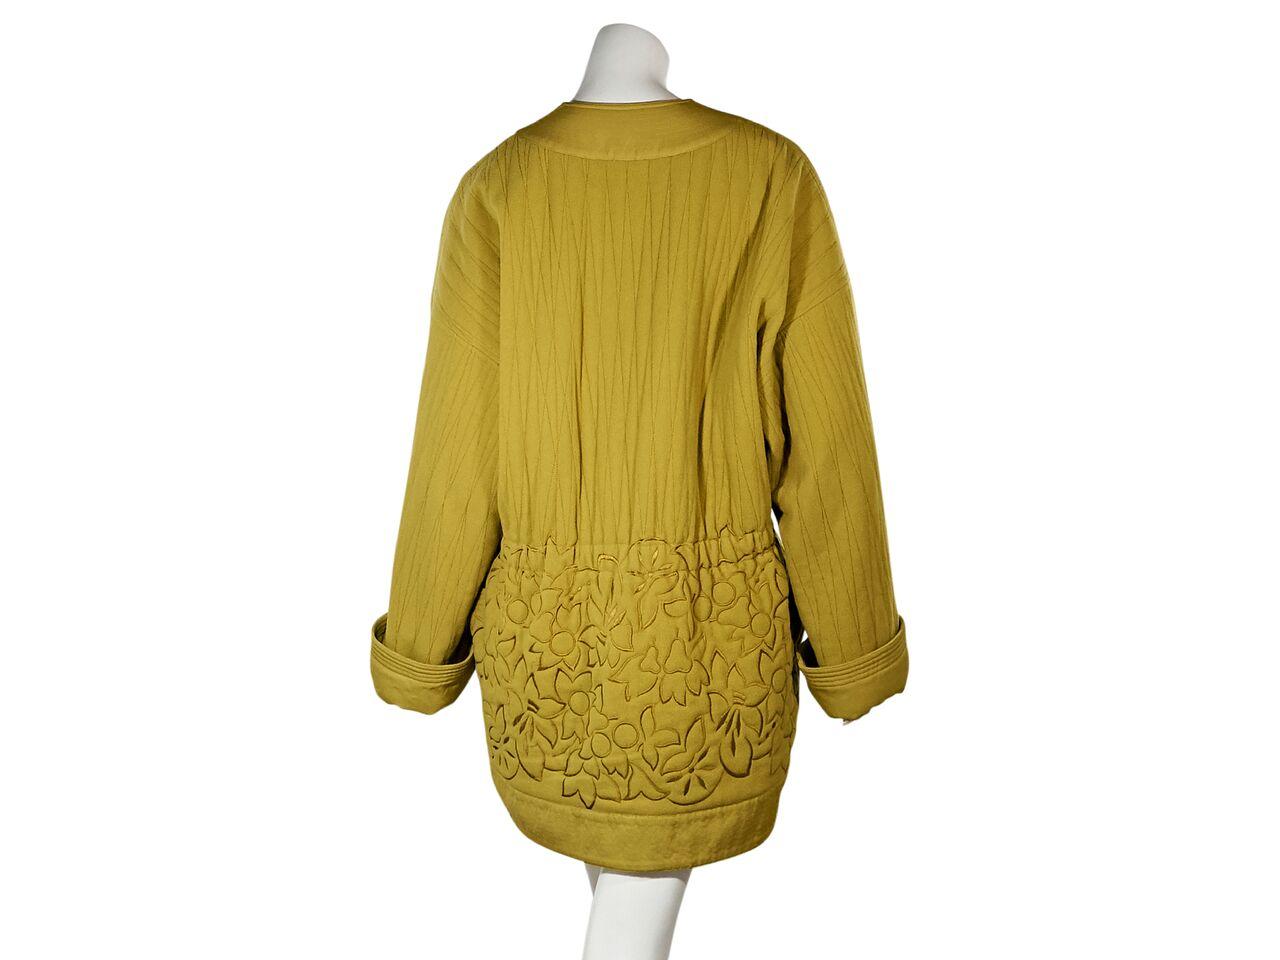 Product details:  Vintage mustard yellow jacket by Gianni Versace.  Accented with floral embroidery.  Split crewneck.  Long sleeves.  French cuffs.  Concealed zip-front closure.  Waist slide pockets.  46.5